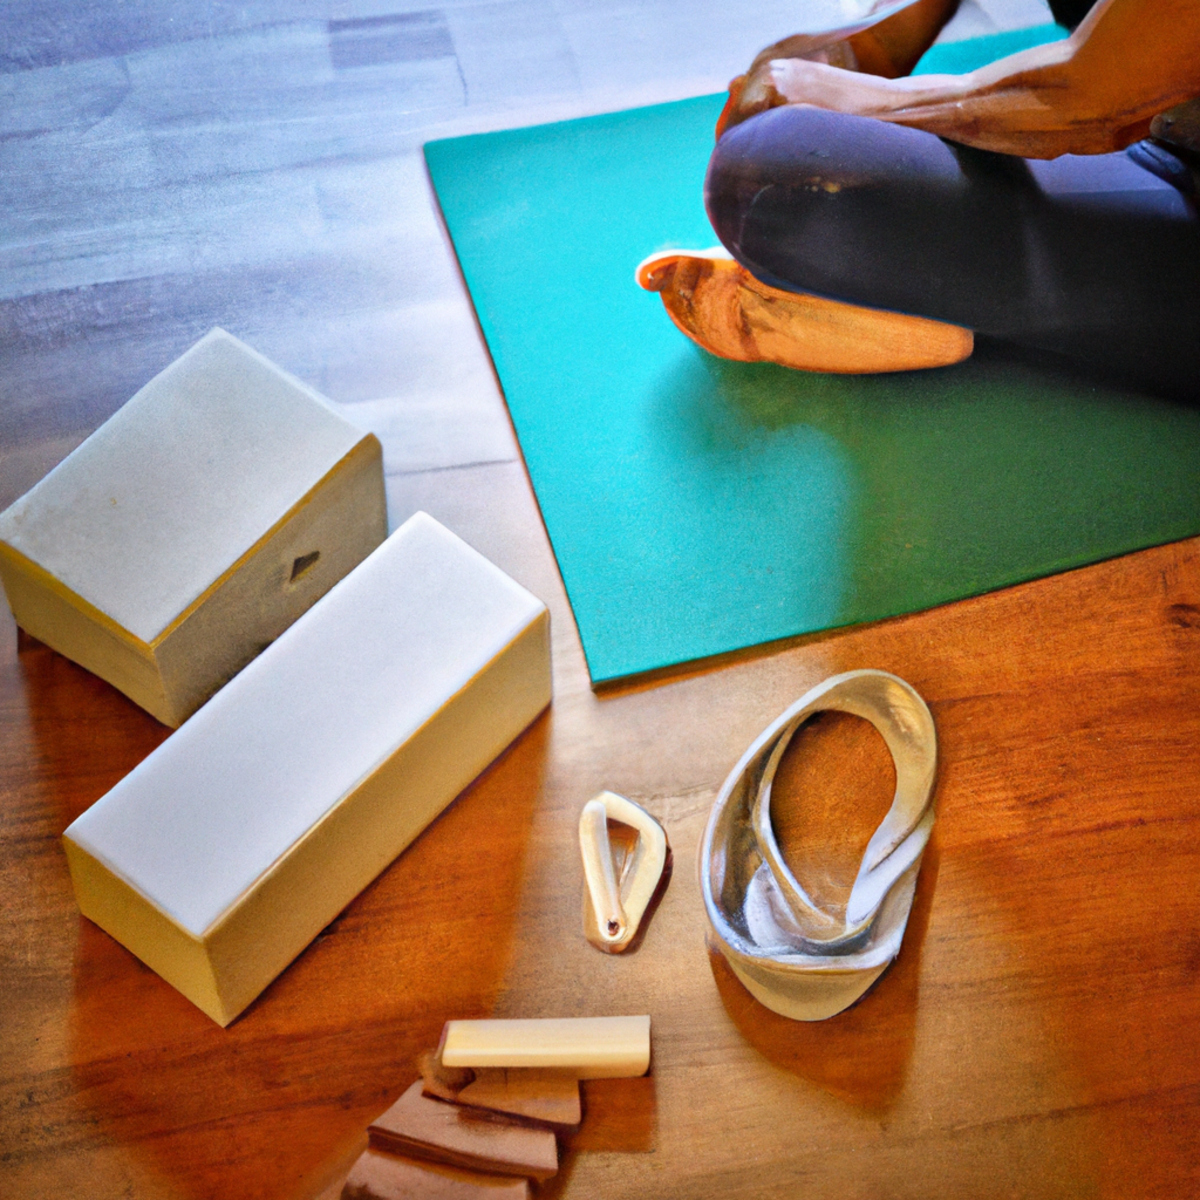 The photo depicts a serene scene of a yoga mat placed on a wooden floor, surrounded by various yoga props such as blocks, straps, and bolsters. In the center of the mat, there is a pair of bare feet belonging to a senior practitioner, who is sitting cross-legged with her eyes closed and hands resting on her knees. The woman's posture is upright and relaxed, indicating a sense of inner peace and mindfulness. This image beautifully captures the essence of senior exercises and fitness. The background of the photo shows a large window with natural light streaming in, creating a warm and inviting atmosphere. The overall composition of the photo conveys the message of the article, highlighting the benefits of yoga for seniors, including improved flexibility, balance, and mental well-being. It serves as an inspiring visual representation of how seniors can engage in Senior Exercises and Fitness through activities like yoga to enhance their physical and mental health.